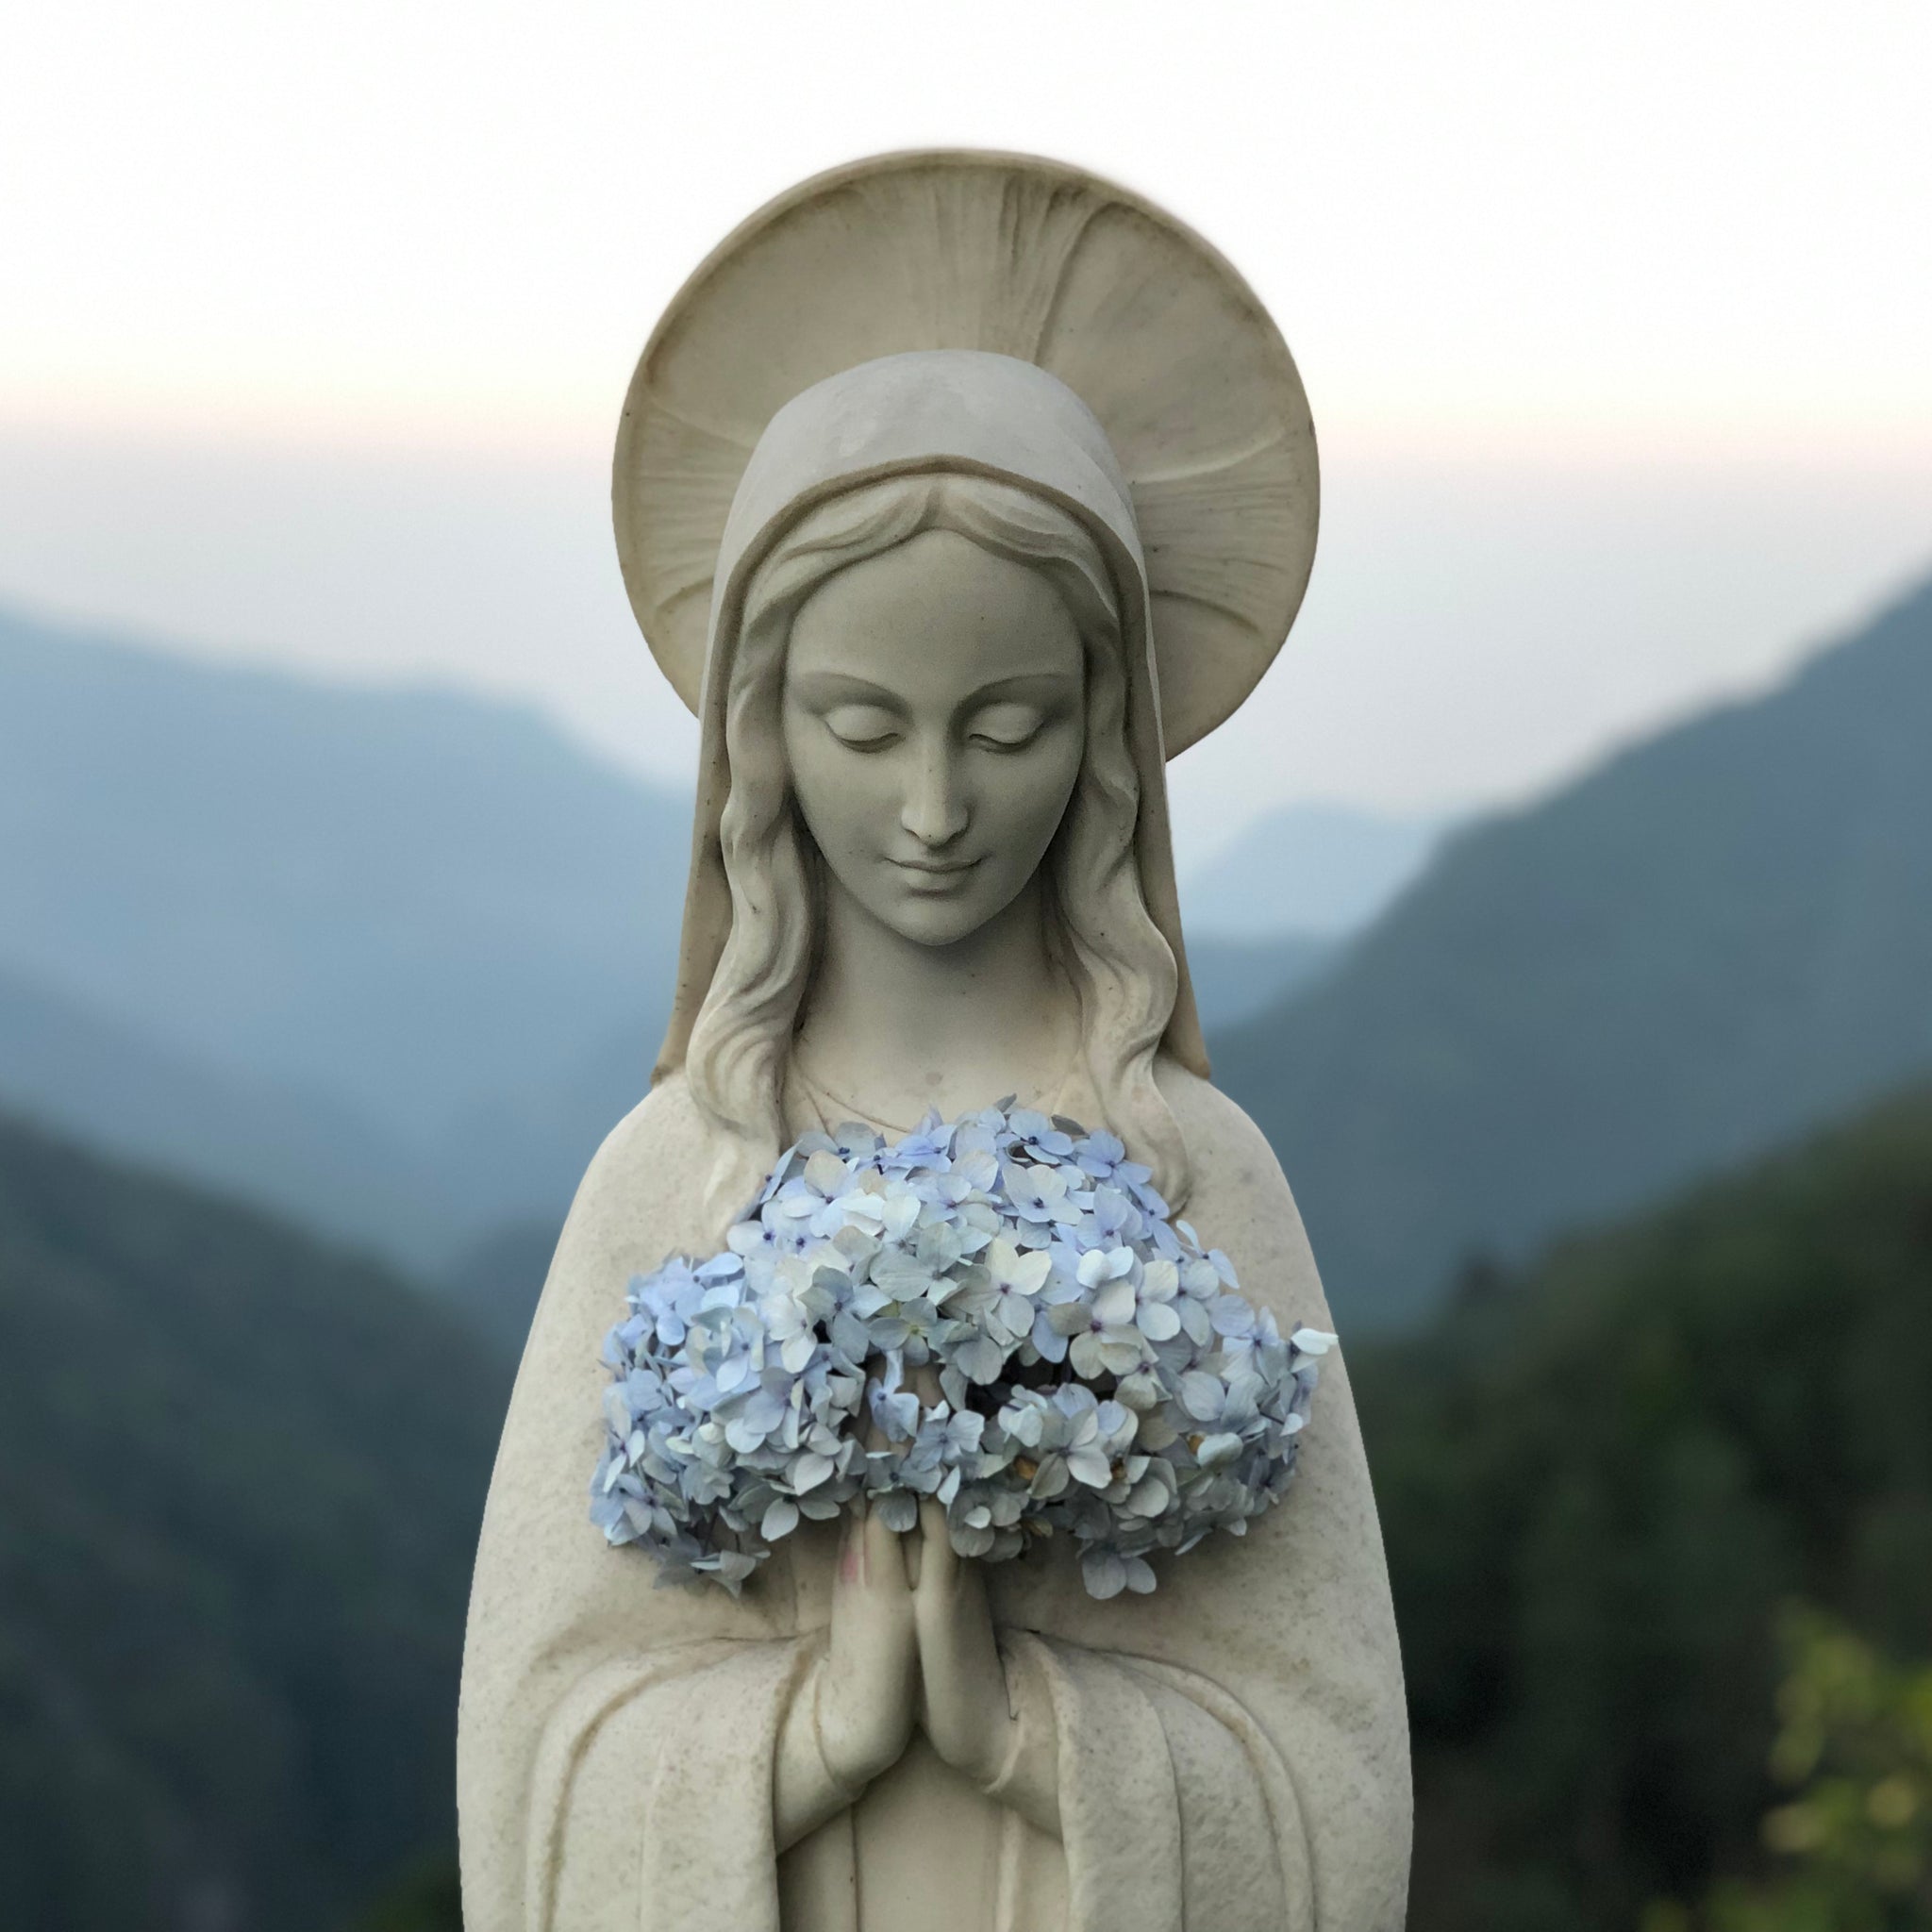 5 Reasons to turn to Our Lady of Sorrows